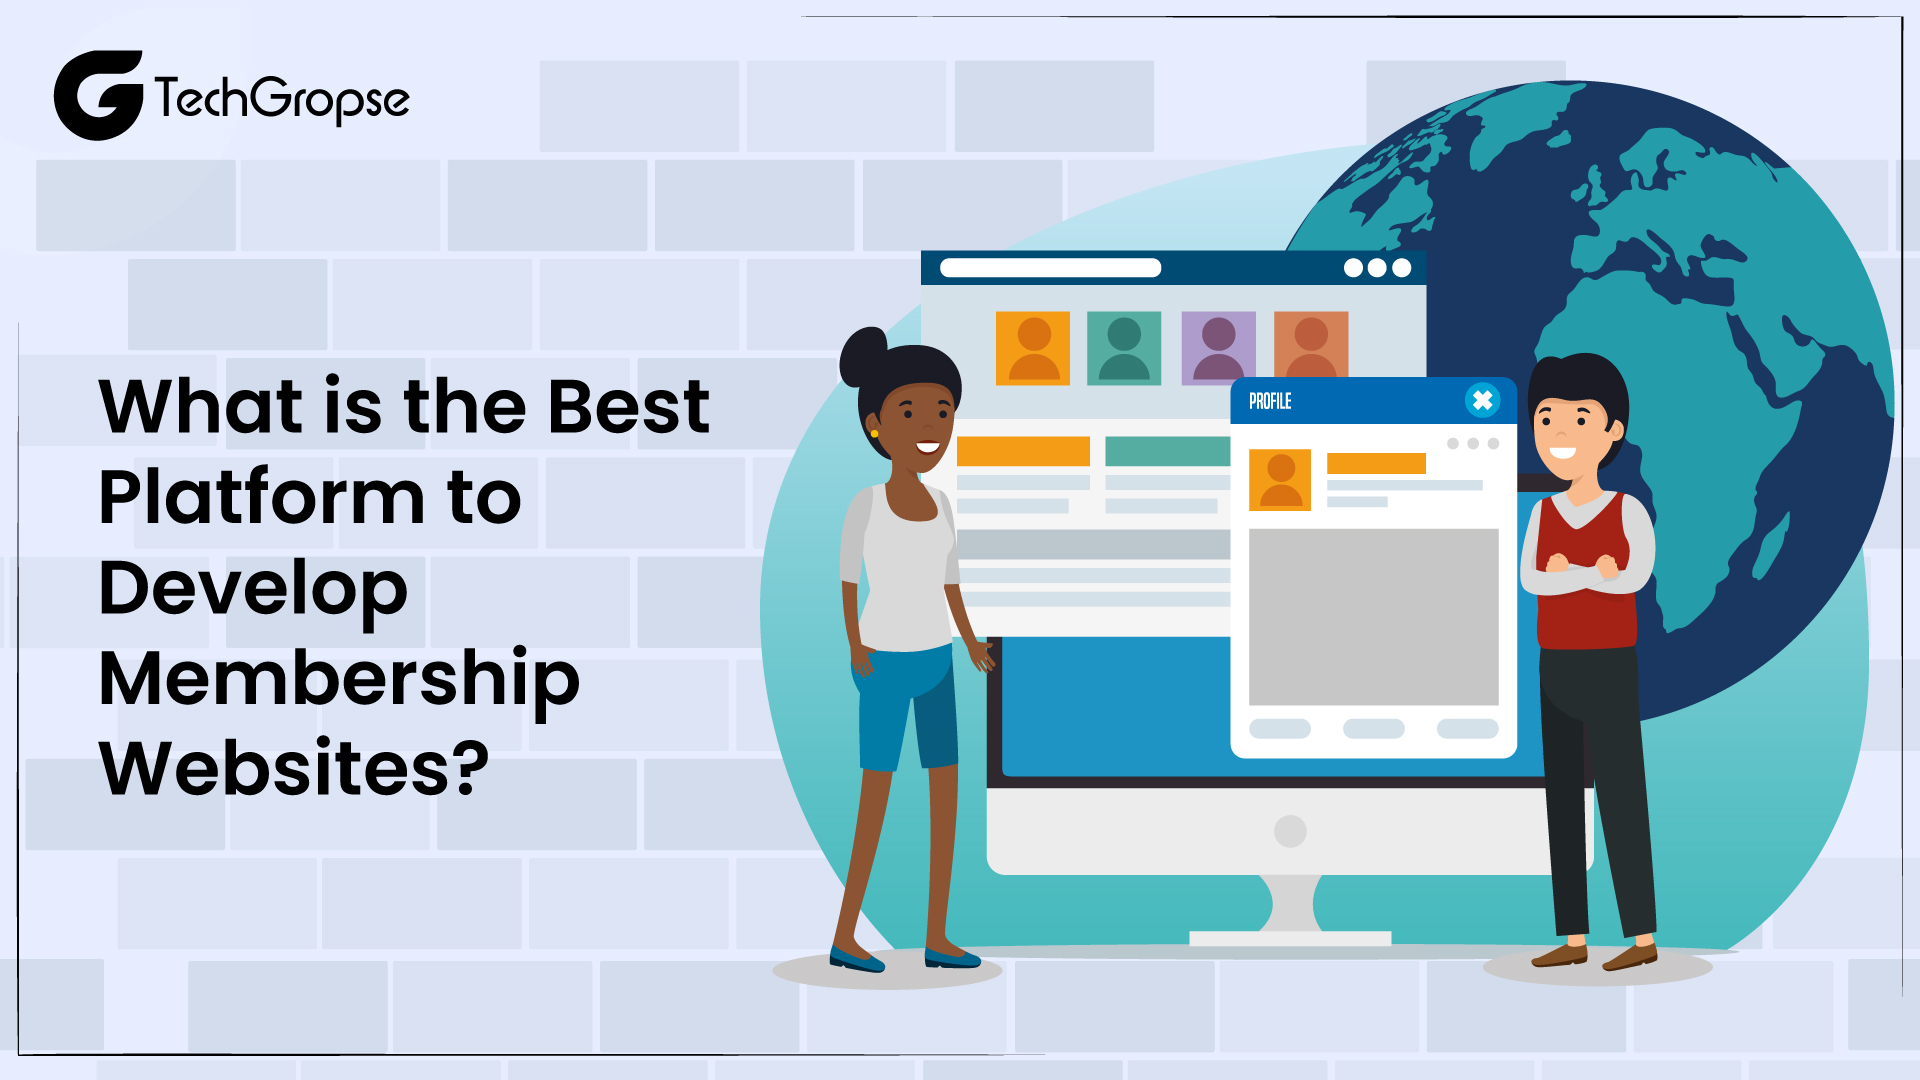 What is the Best Platform to Develop Membership Websites?